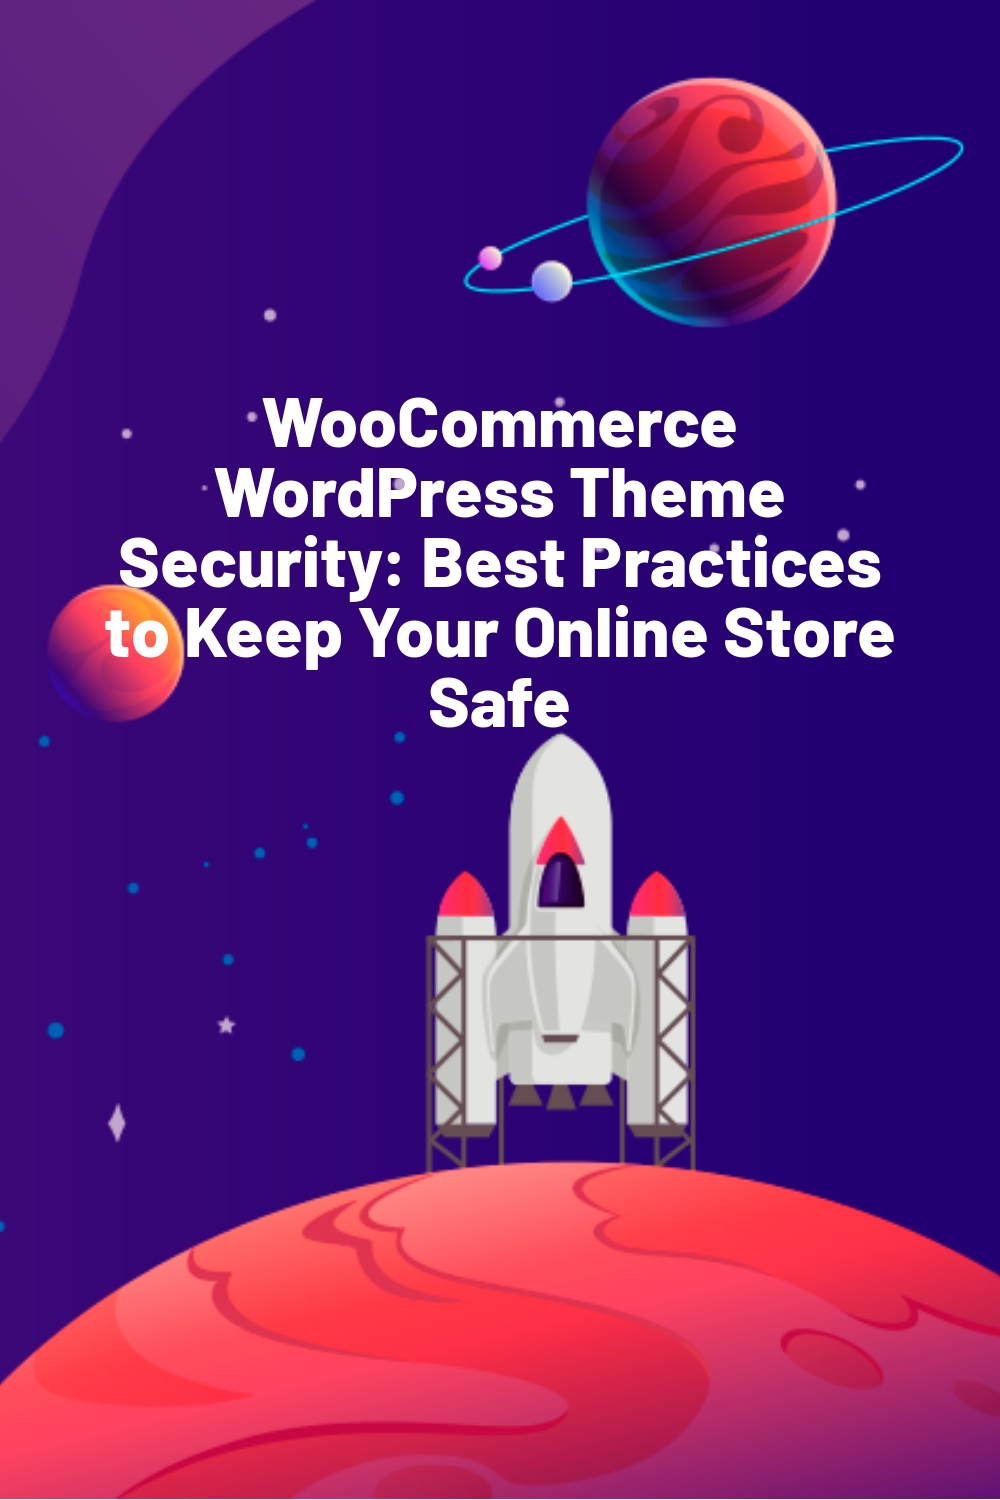 WooCommerce WordPress Theme Security: Best Practices to Keep Your Online Store Safe